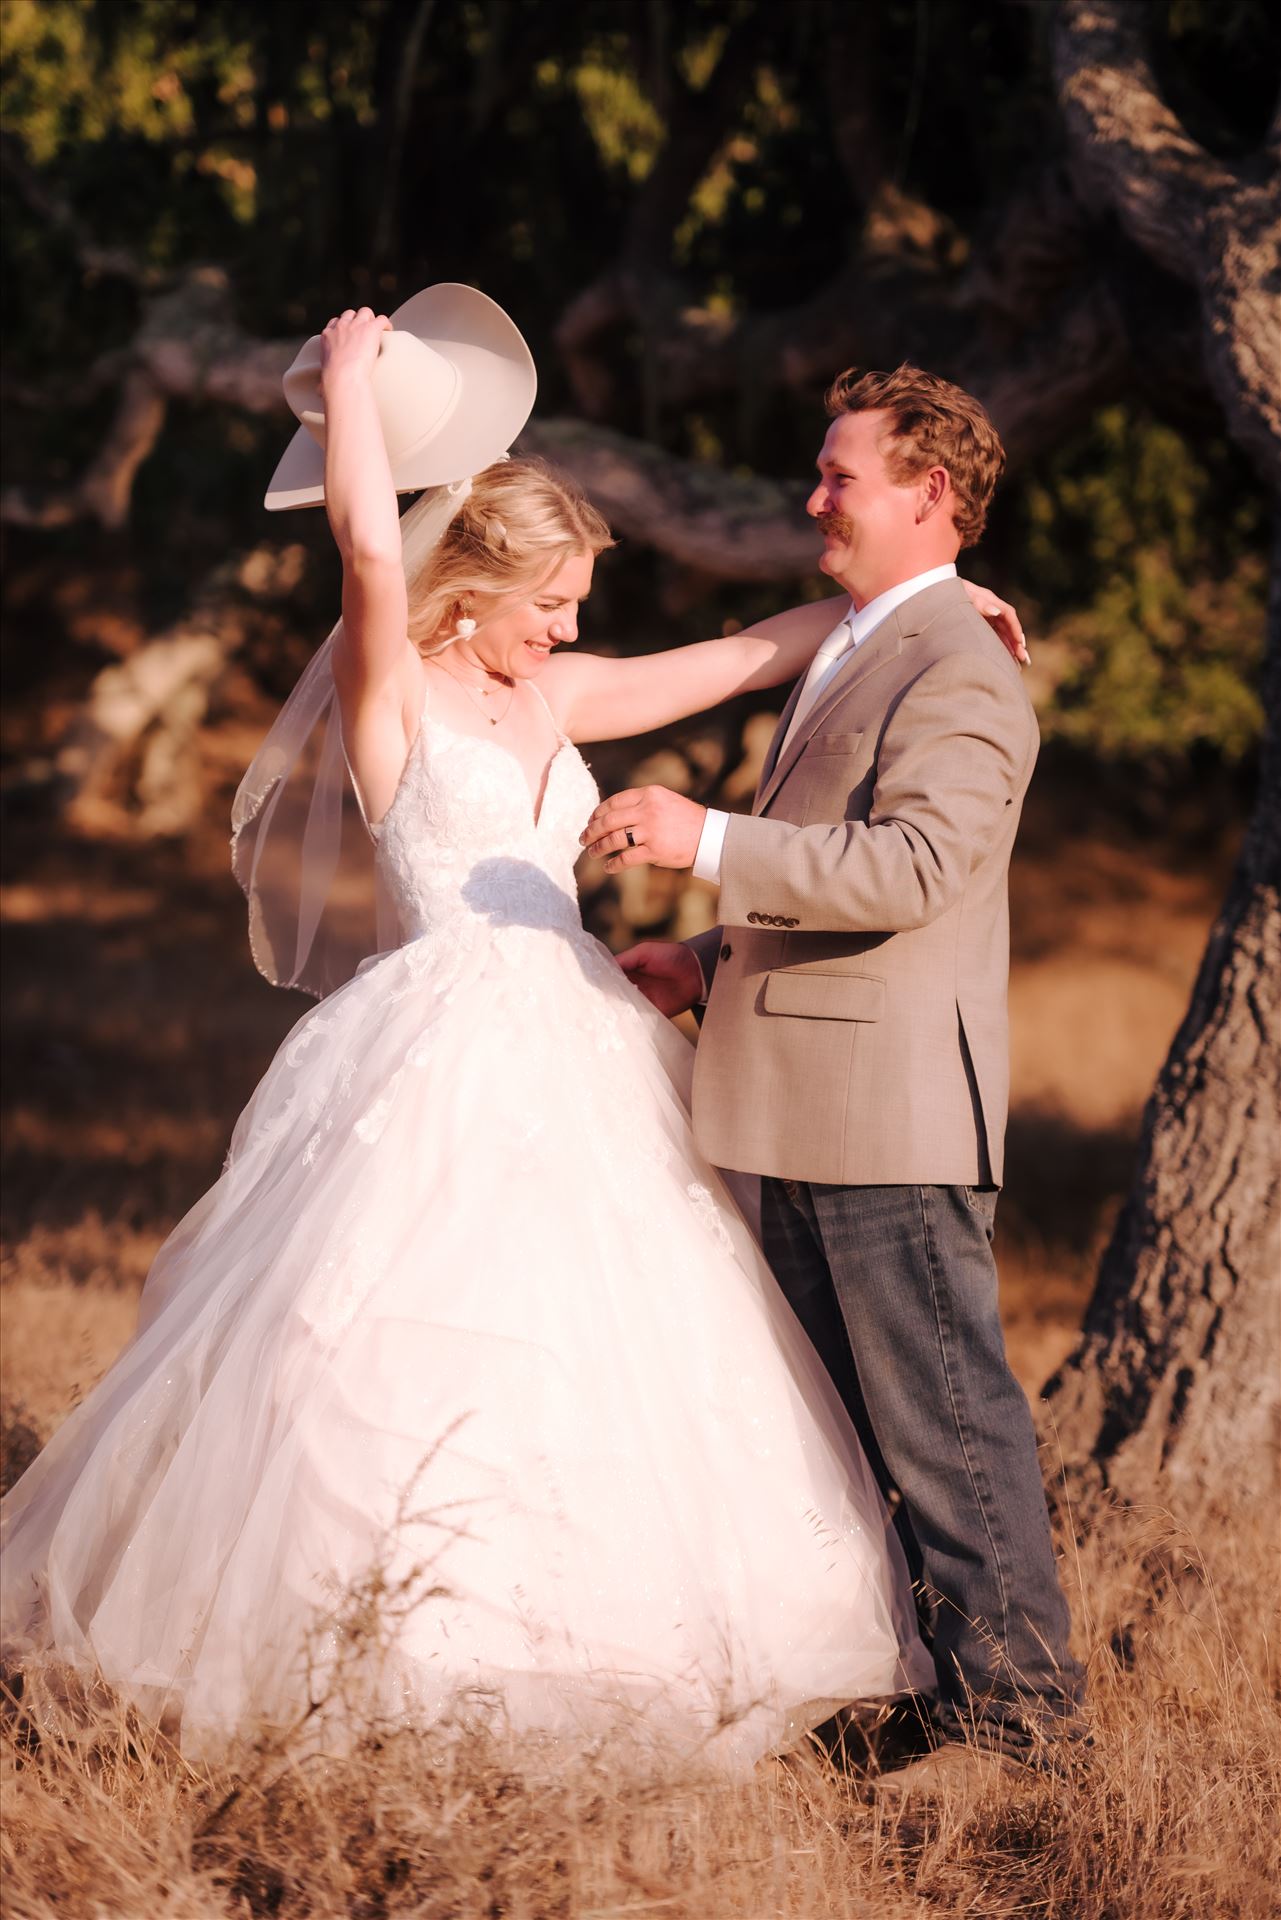 FW-6256.JPG Sarah Williams of Mirror's Edge Photography, a San Luis Obispo and Santa Barbara County Wedding and Engagement Photographer, captures Katie and Joe's country chic wedding in Lompoc, California.  Country Bride and Groom with Bride wearing Cowboy hat. by Sarah Williams